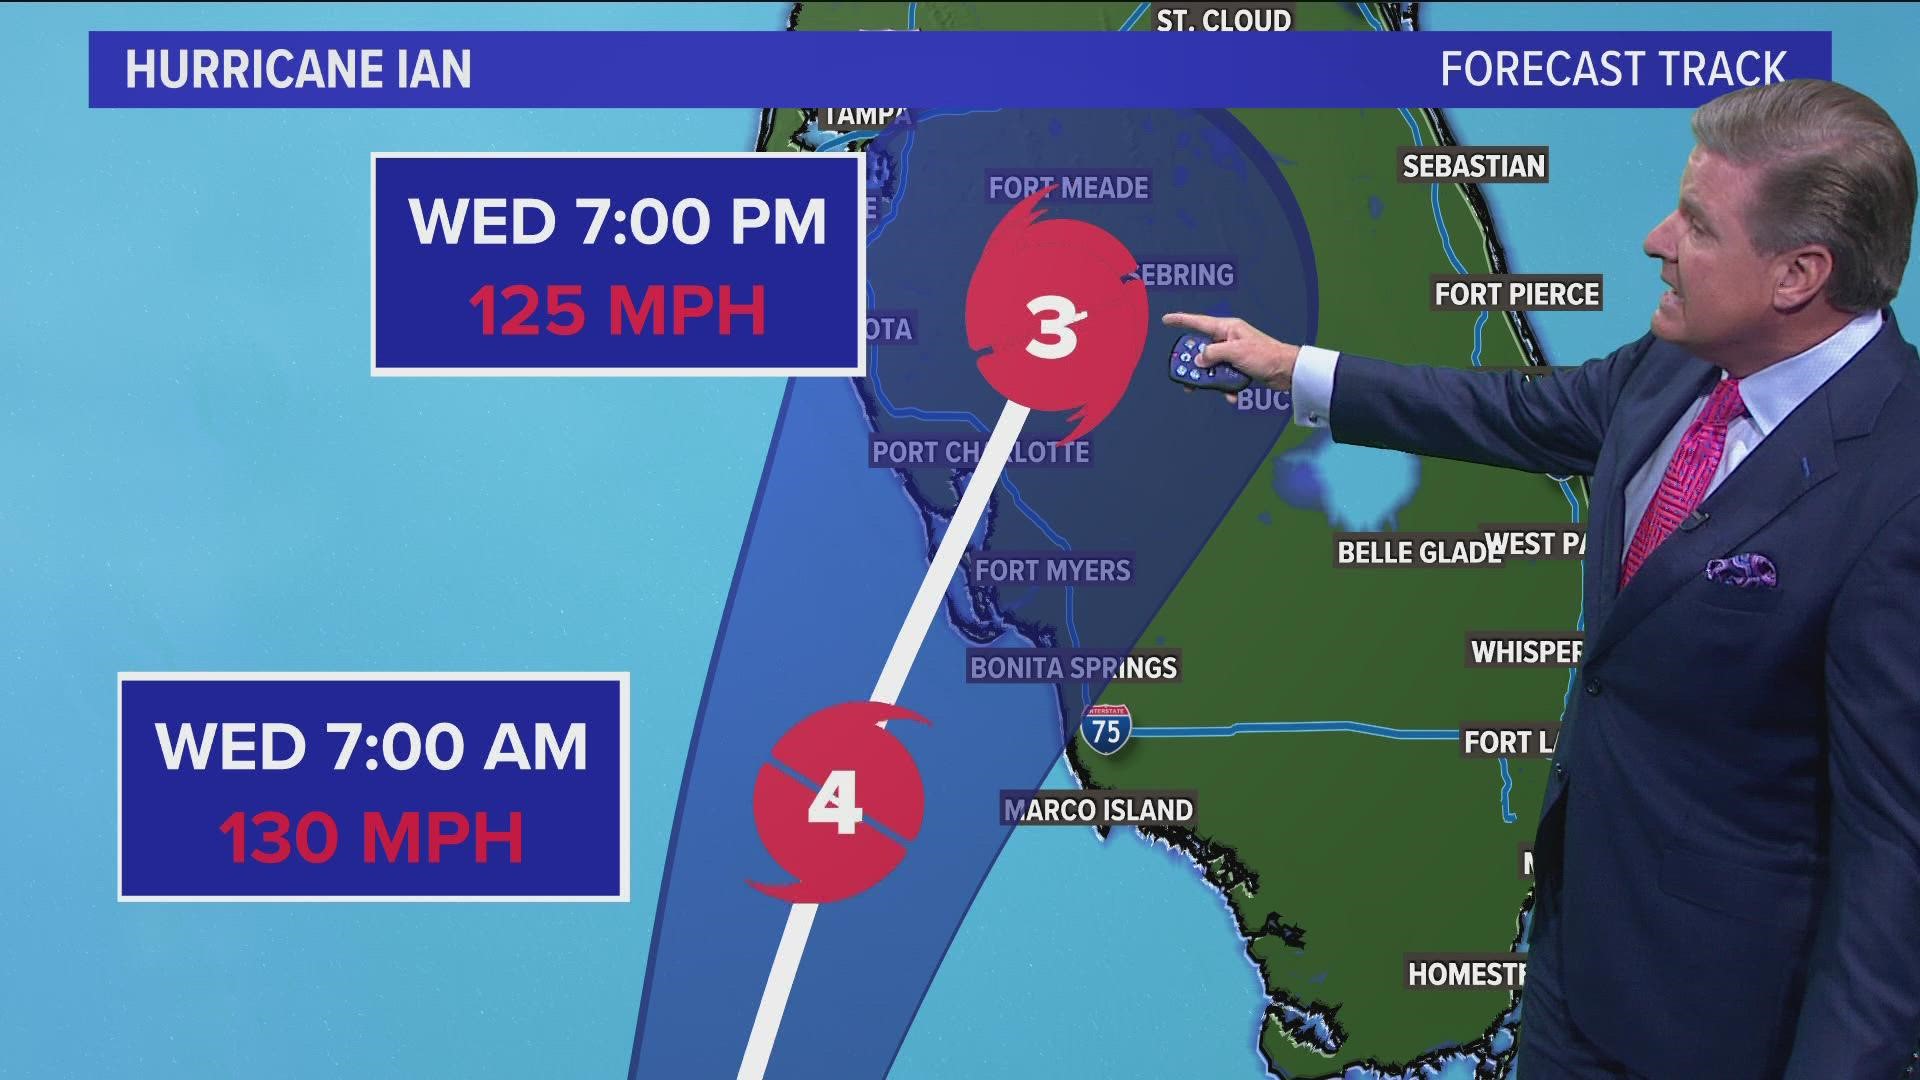 Hurricane Ian is expected to make landfall in Florida Wednesday afternoon.